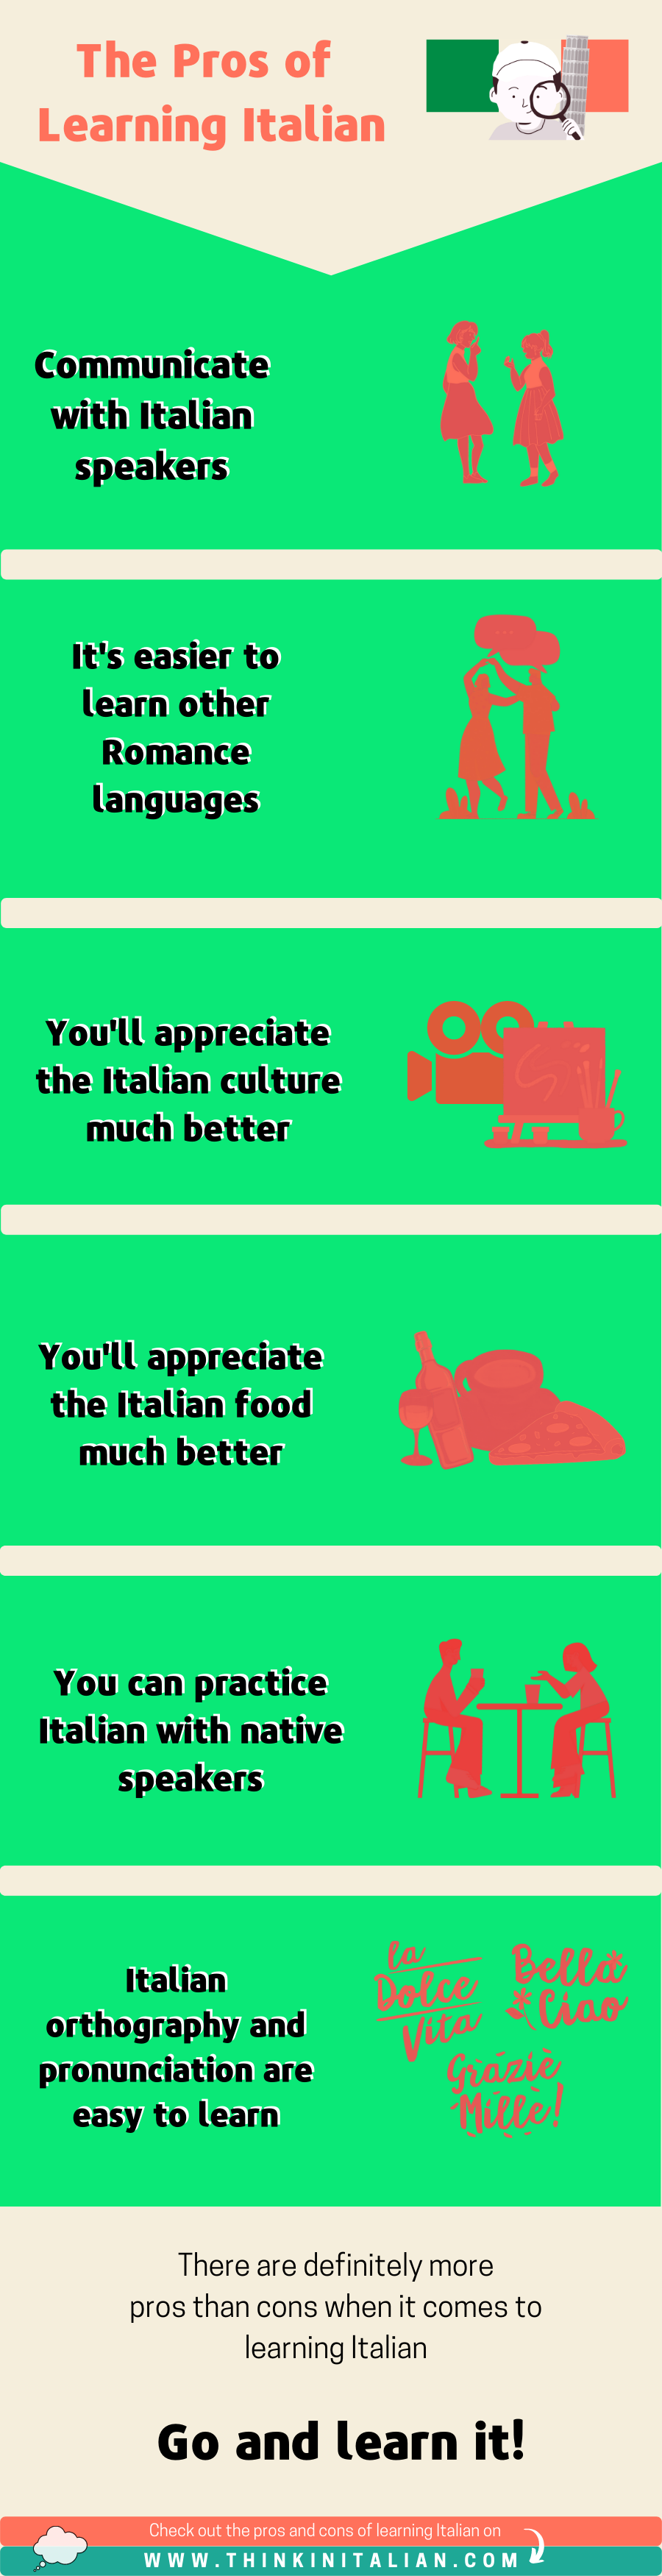 pros and cons of learning italian